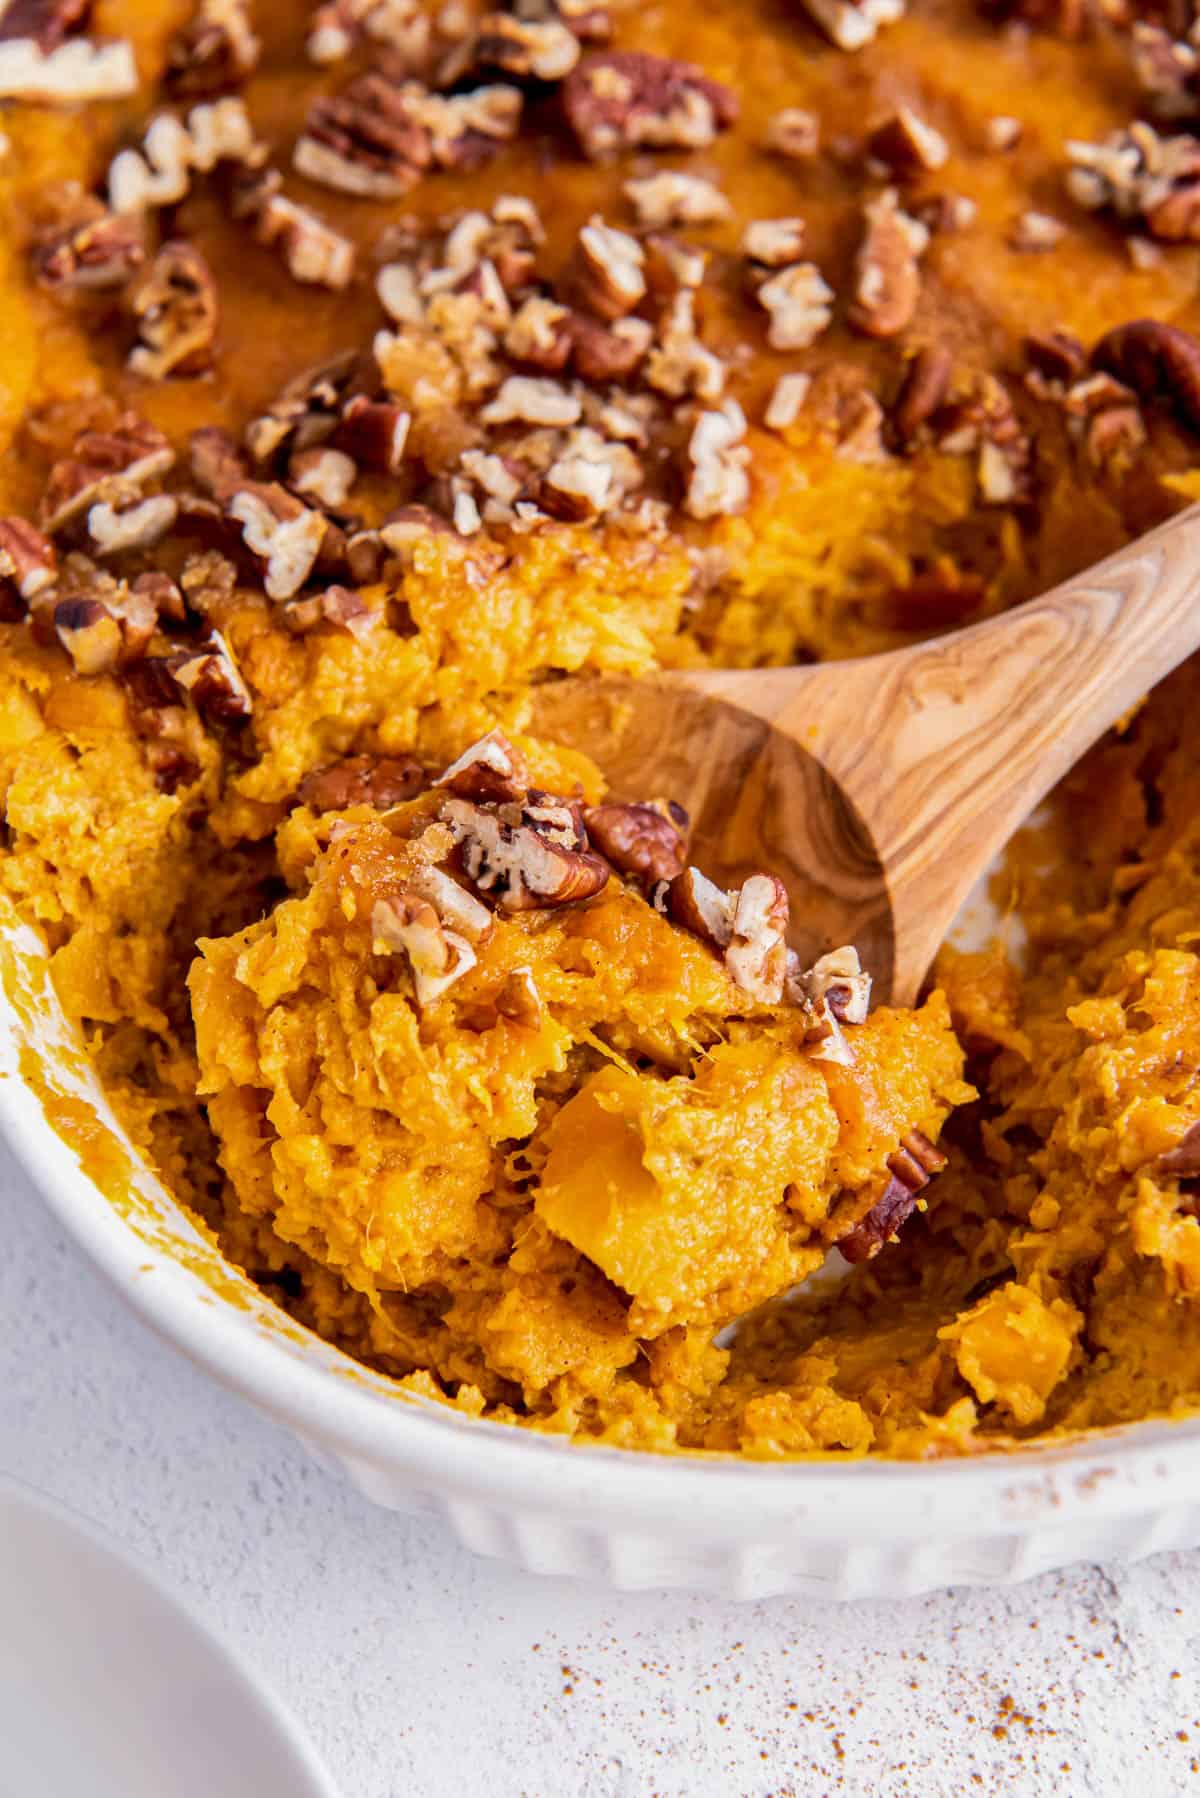 a spoon scooping out sweet potato souffle